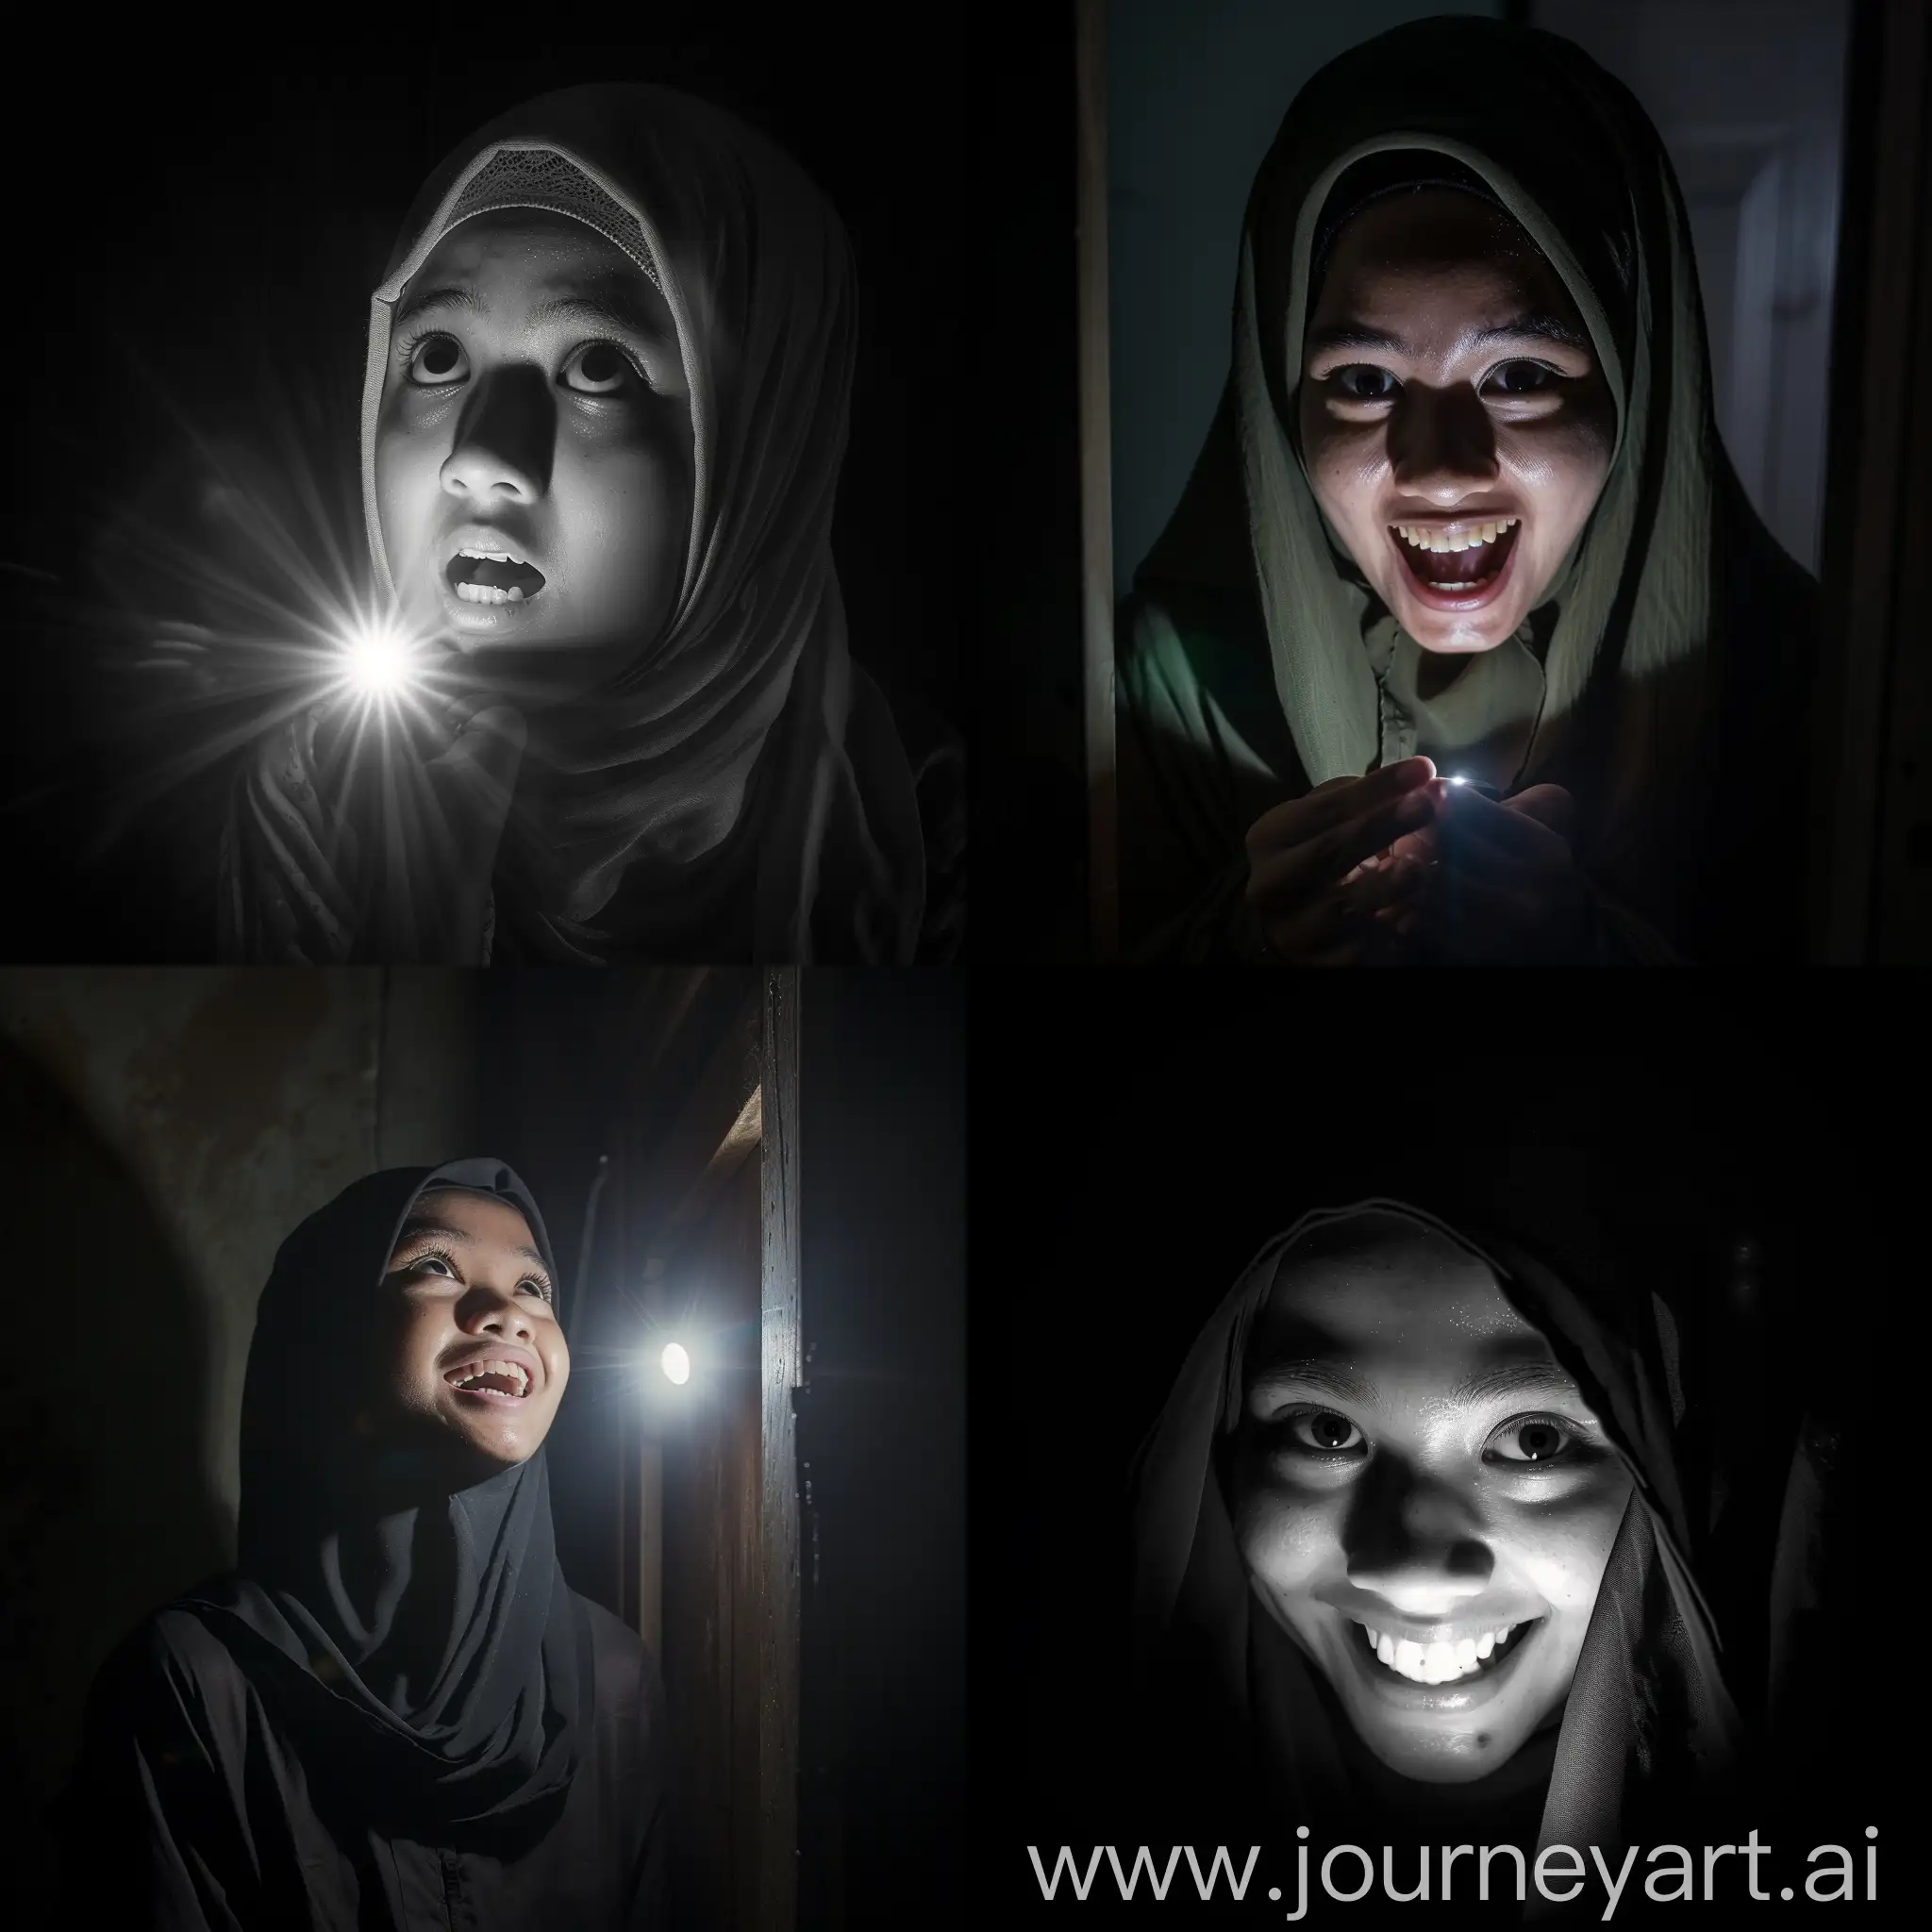 Bright front flash lighting, isolated on a 20 year old Indonesian hijab wearing girl pulling a funny face, after being caught hiding in a cupboard at night, with a laughing expression. bright white flash style light Chiaroscuro light like a bright spotlight.